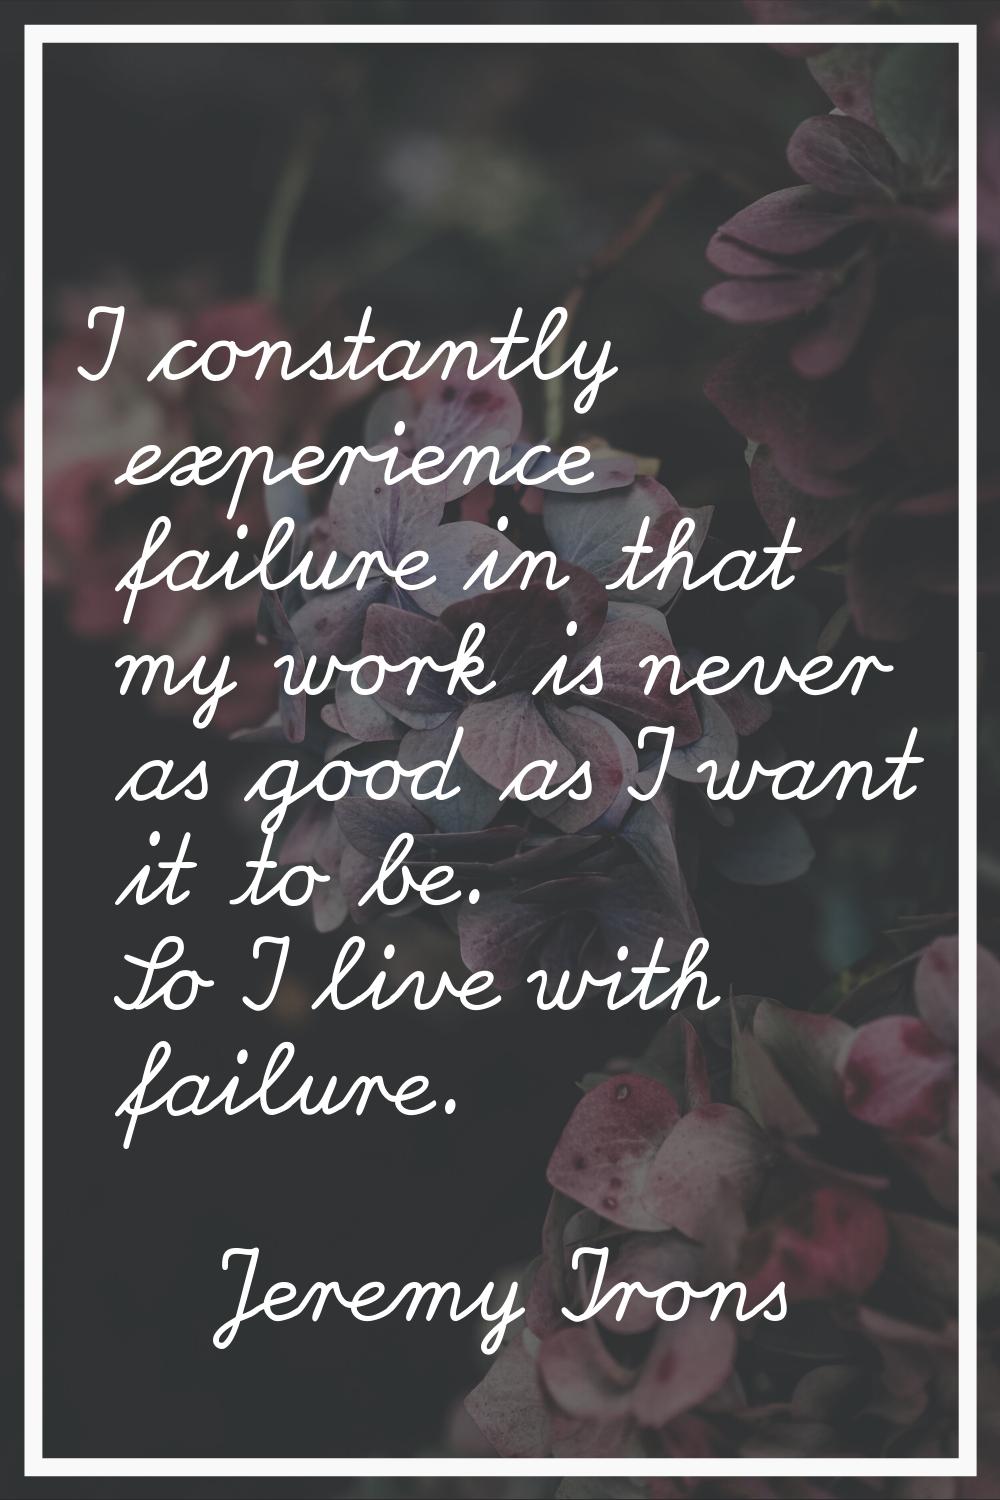 I constantly experience failure in that my work is never as good as I want it to be. So I live with